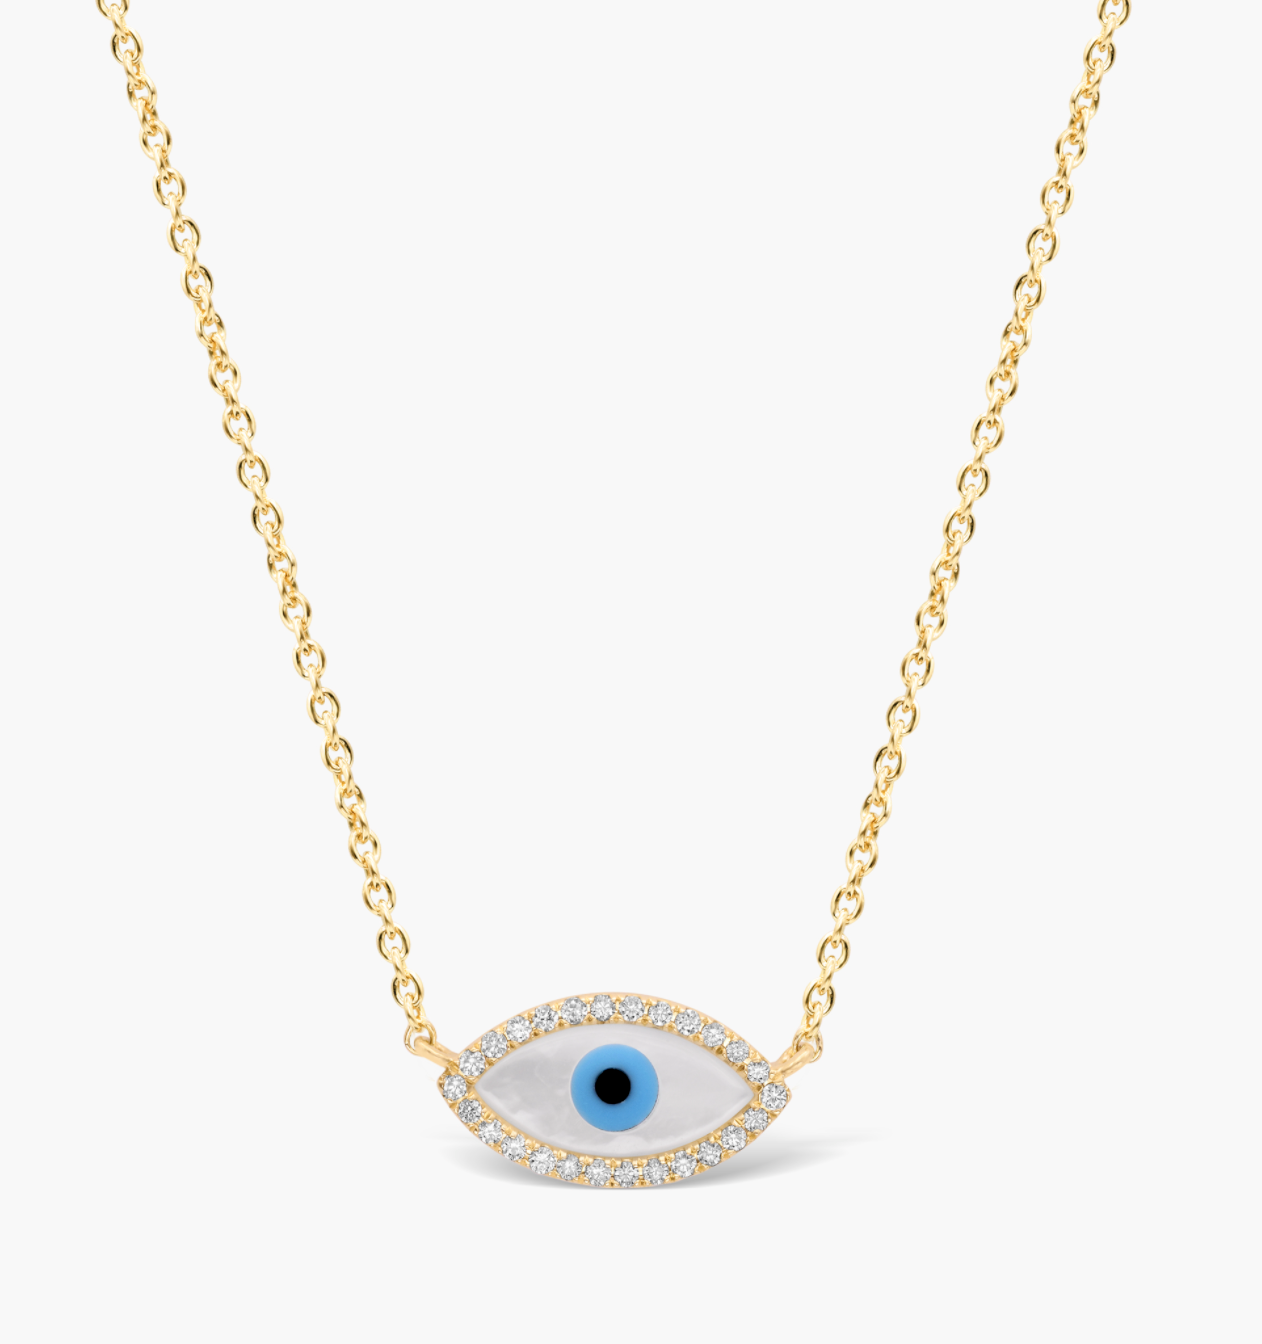 Evil Eye Necklace - Necklace For Women | OMID